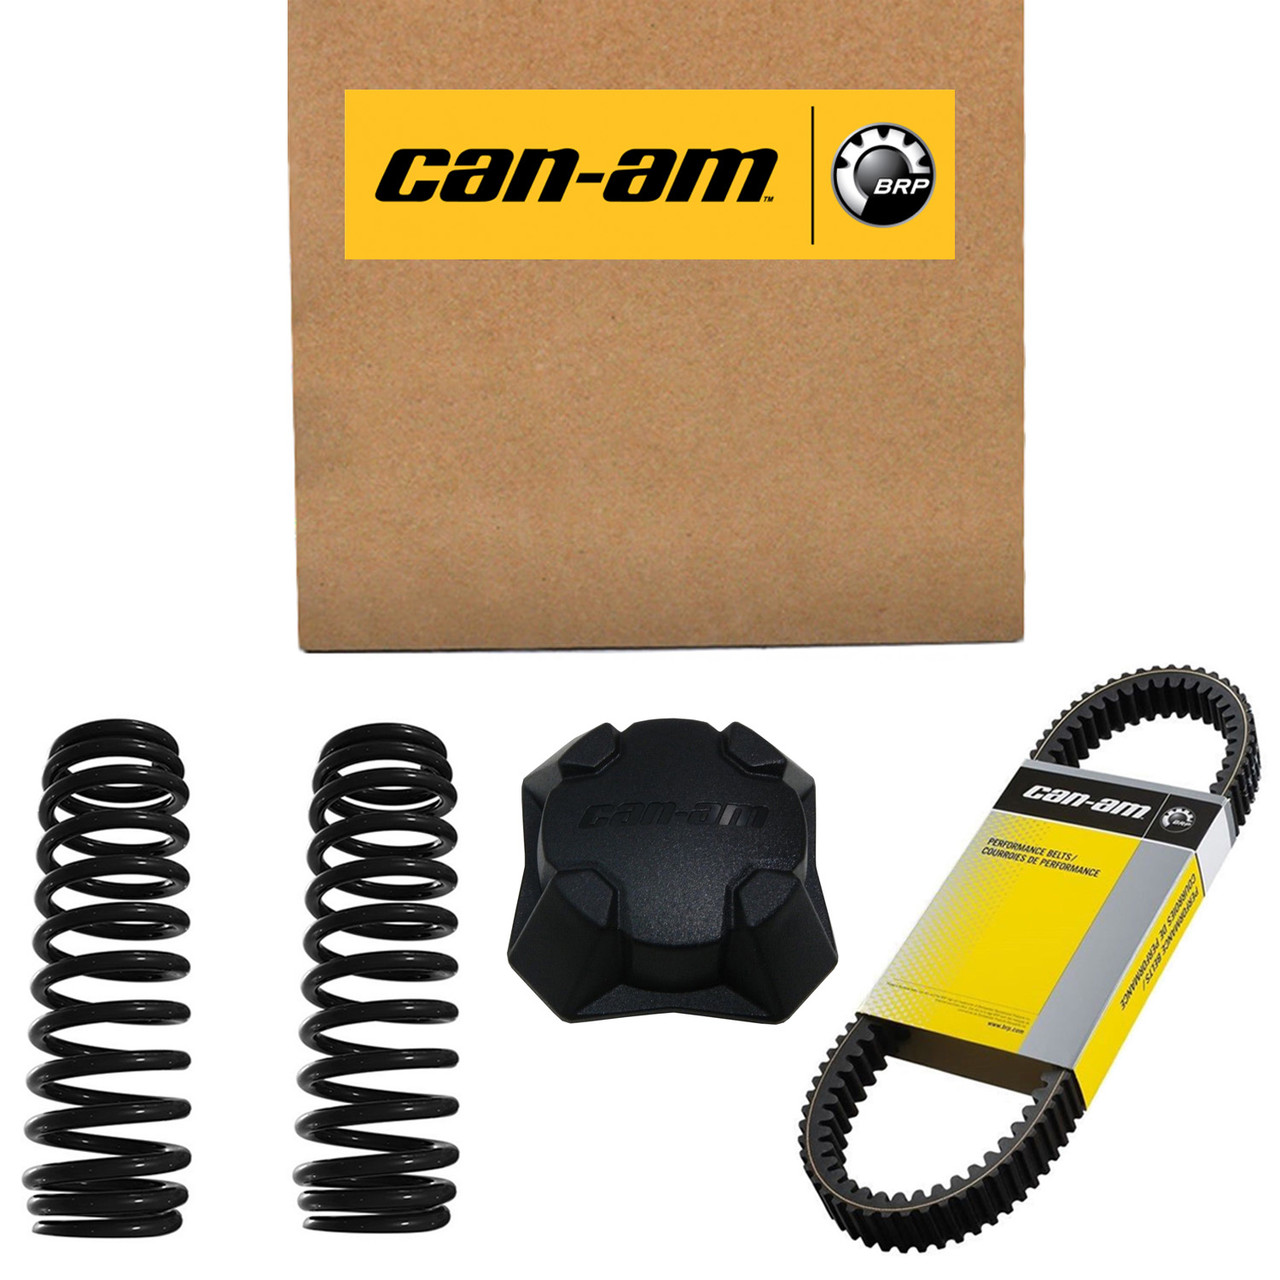 Can-Am New OEM Hood Replacement Kit, 219800220